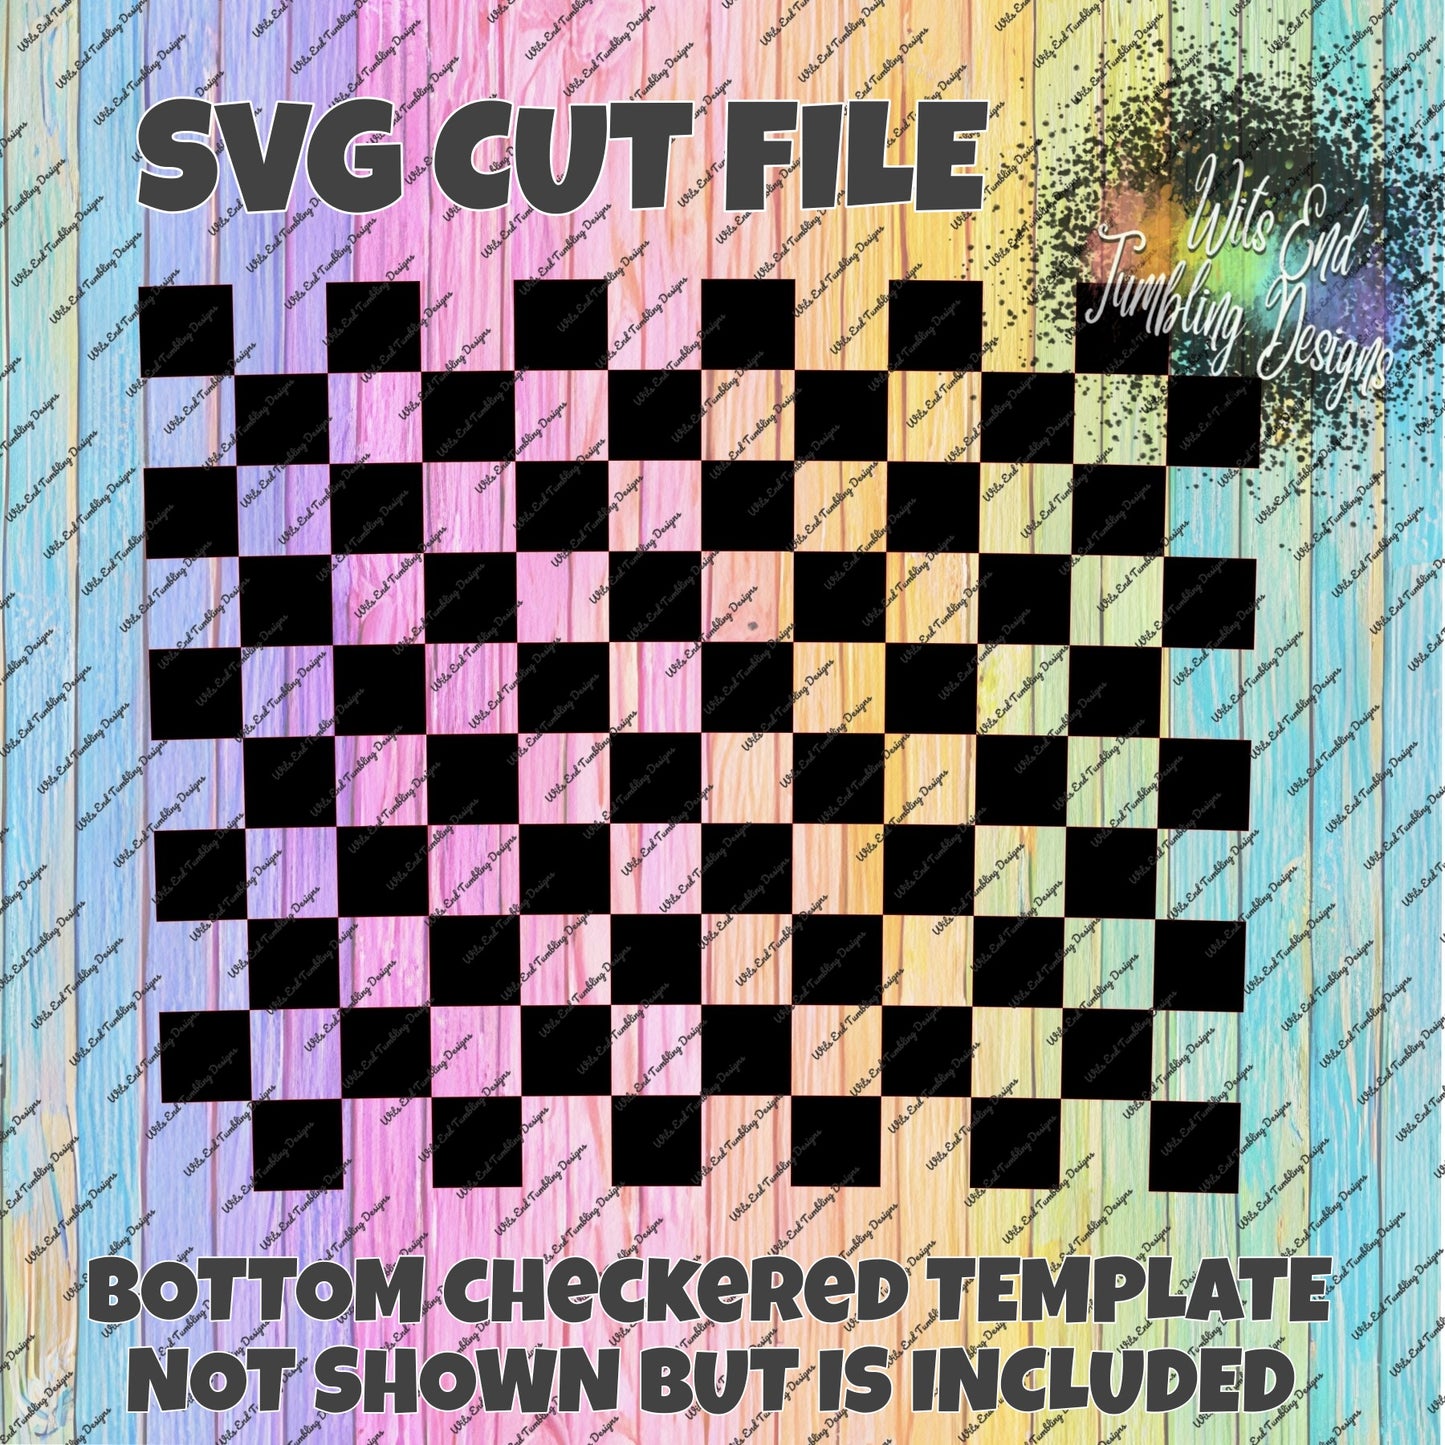 All Checkered Out Seamless with BOTTOM SVG CUT FILE **DIGITAL DOWNLOAD ONLY**